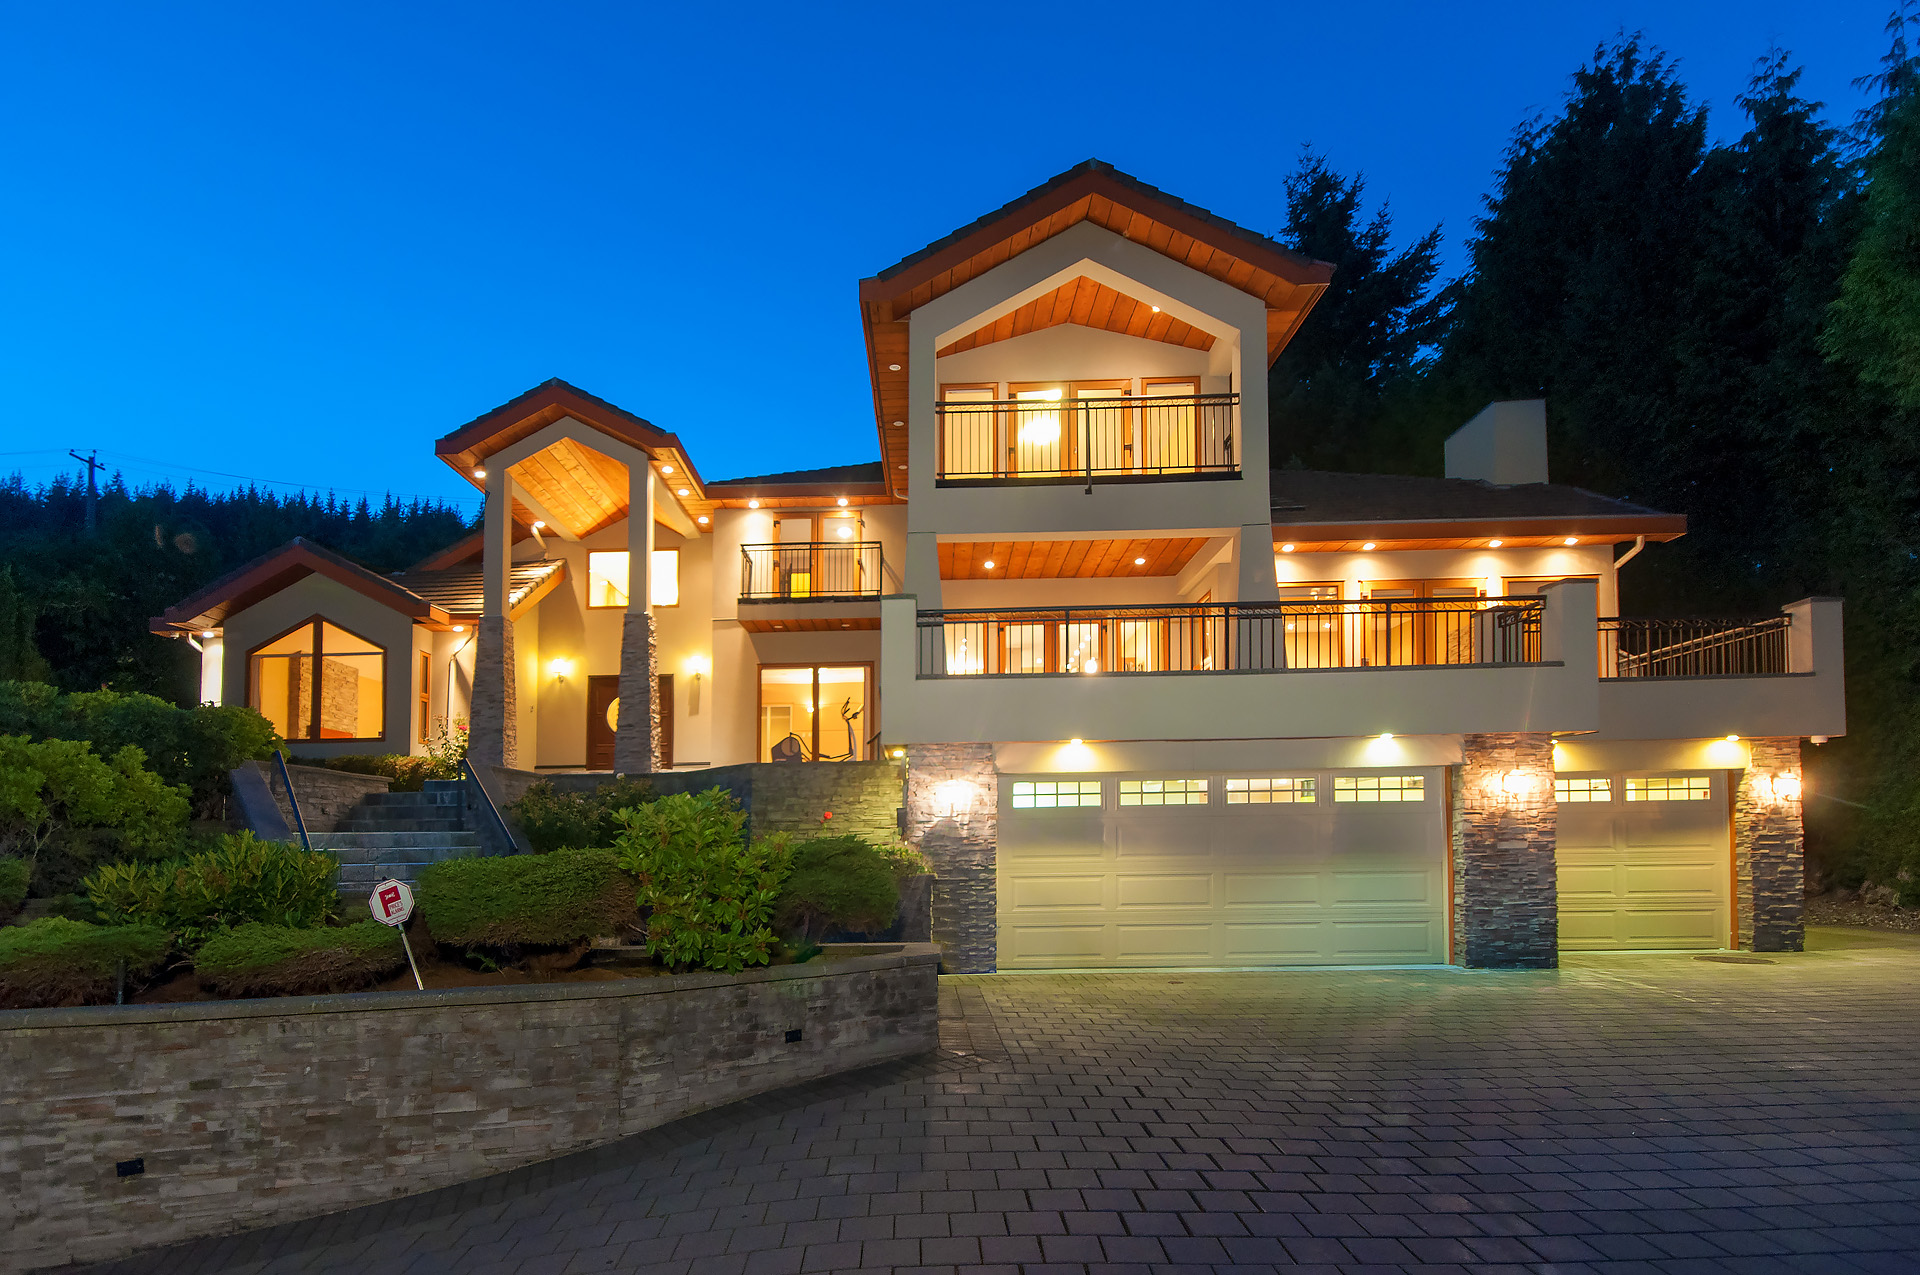 West Vancouver Homes